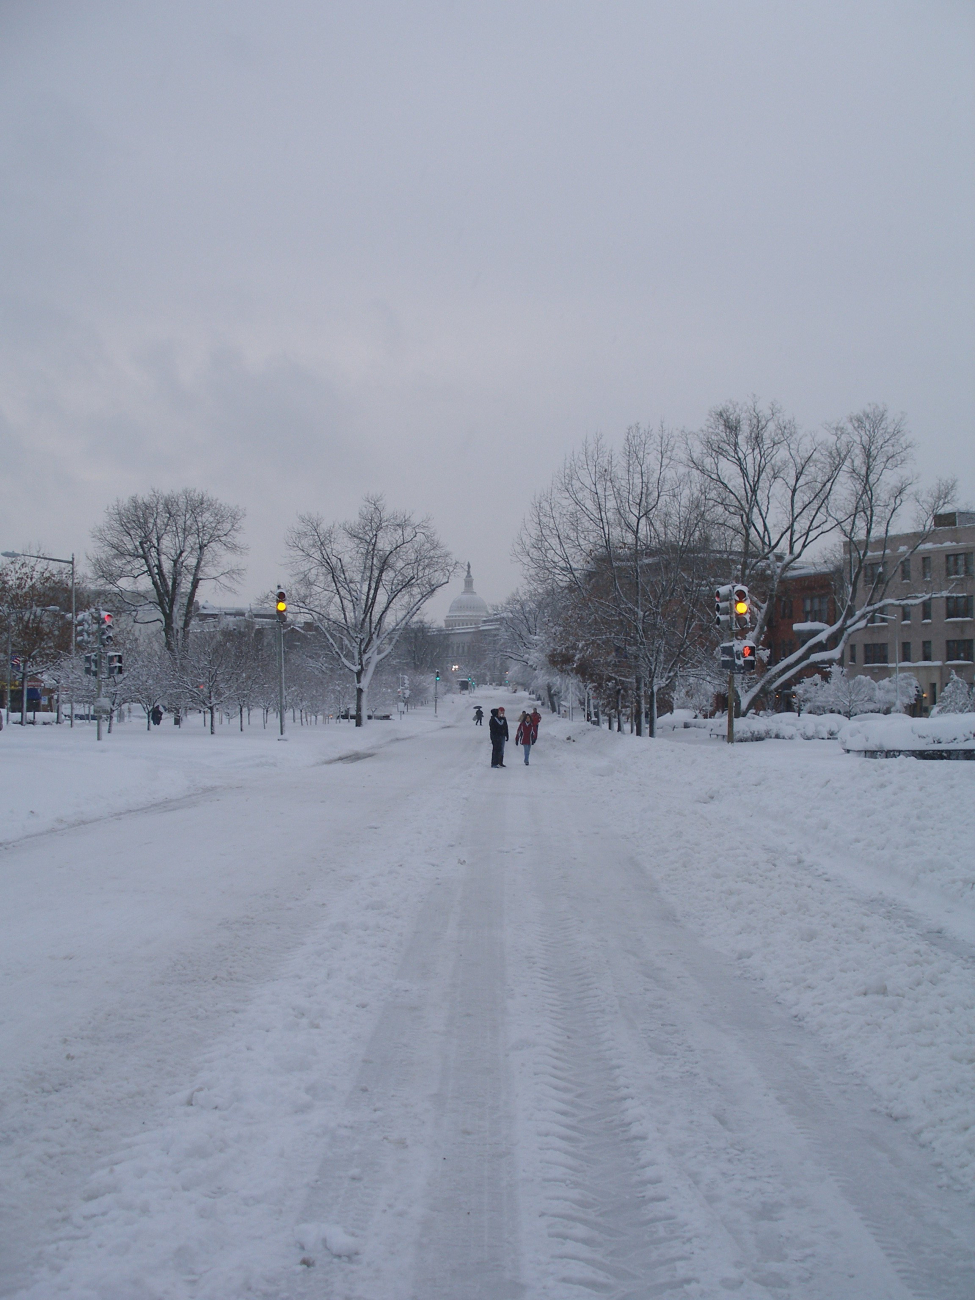 People out enjoying the Capitol Hill area of DC on a vehicle-deserted streetfollowing the February 5-6 snowstorm